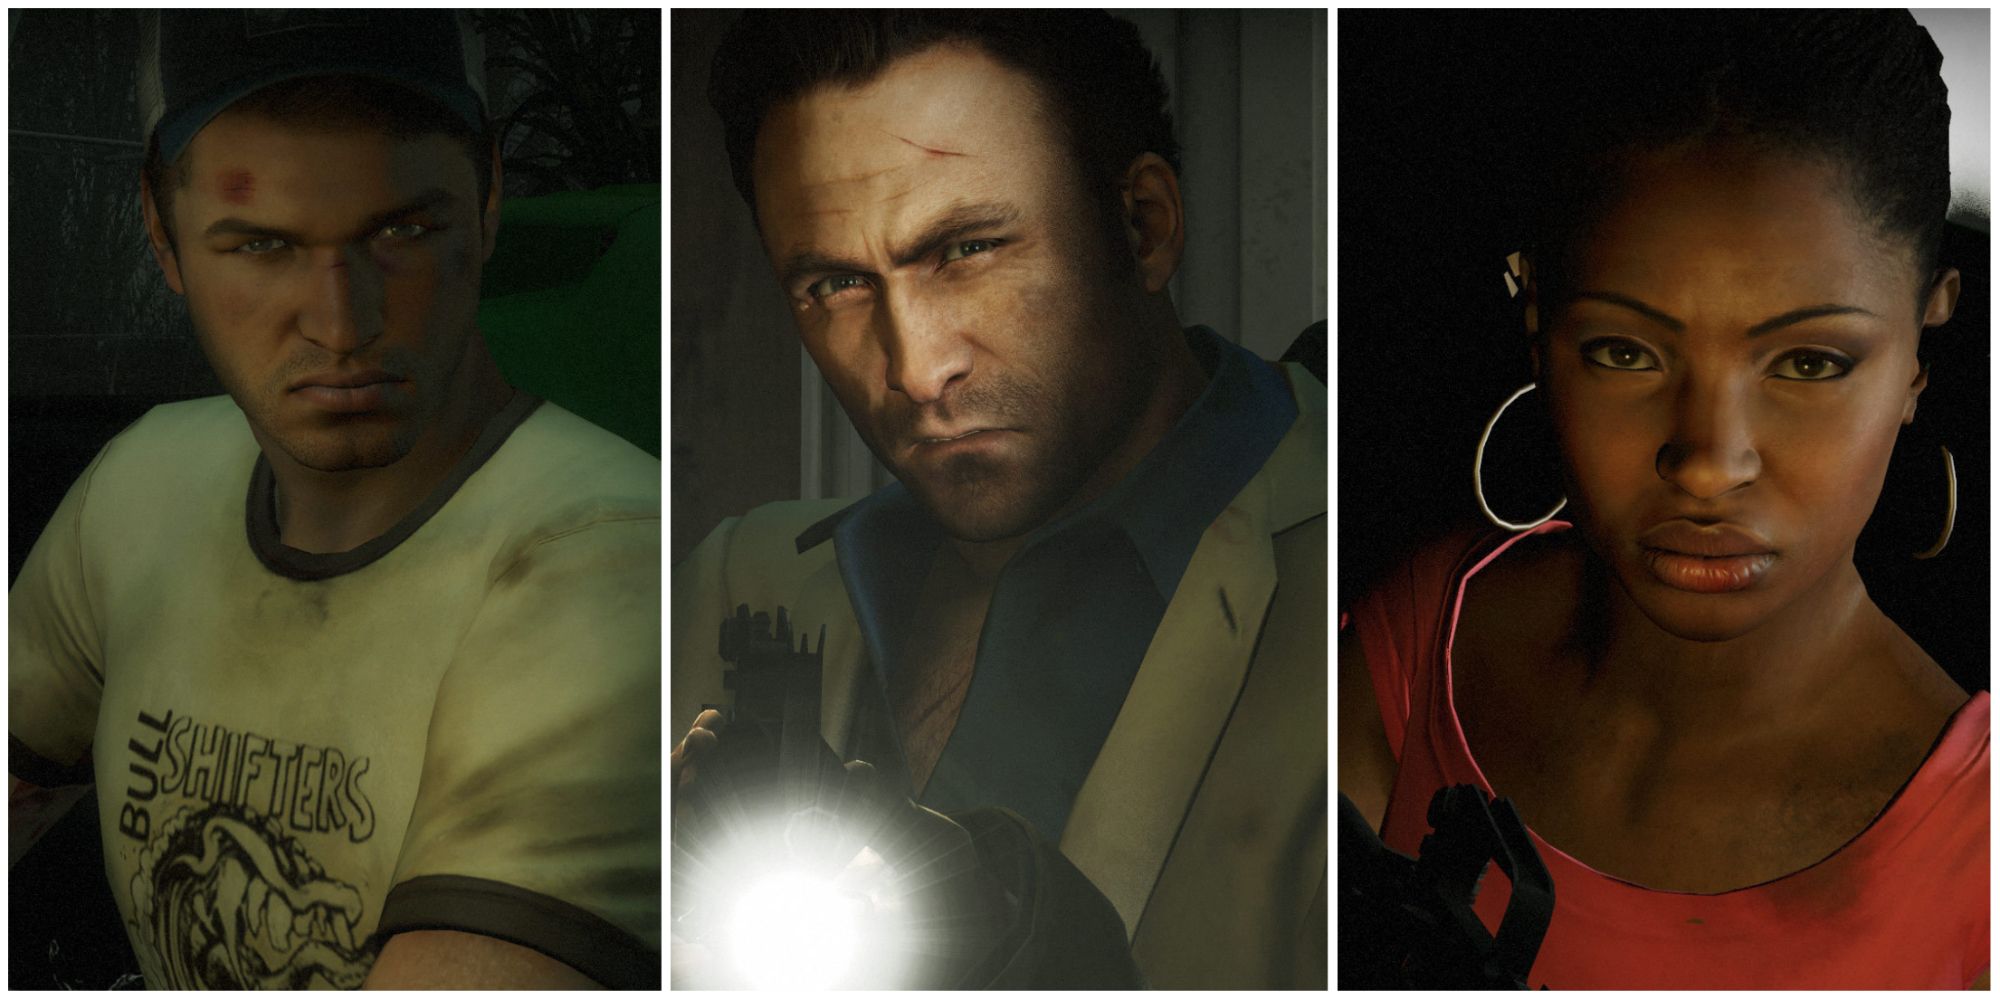 L4D2 - collage of three main characters from Left 4 Dead 2